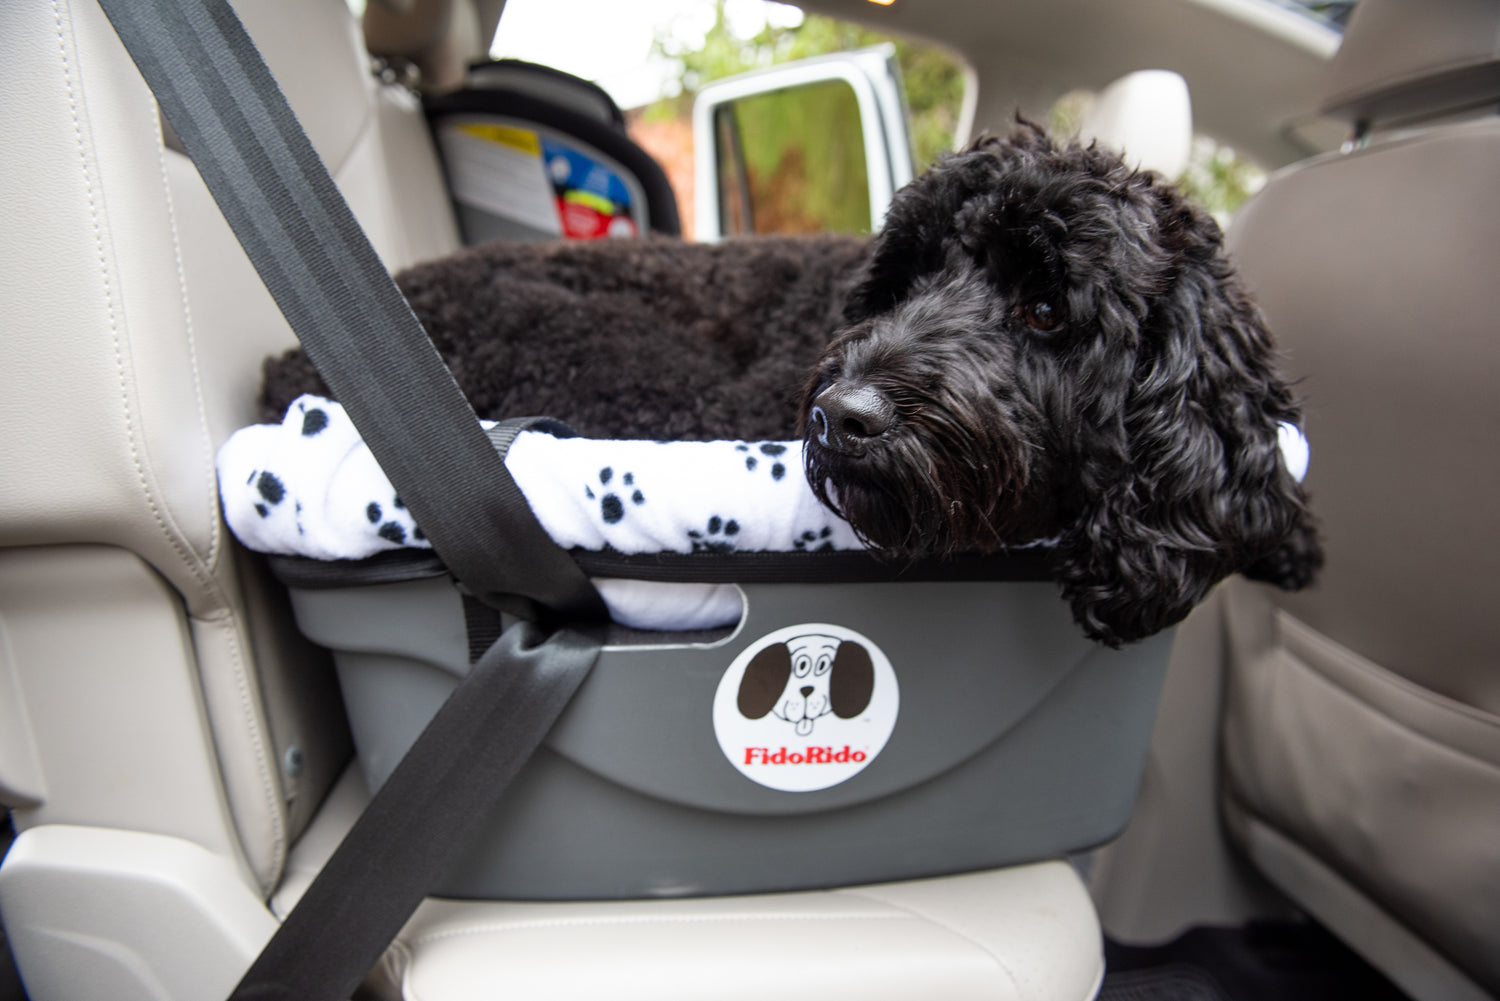 Black mini doodle dog with head rested on paw laying down in Fido Pet Products' FidoRido dog car seat with black paw prints on white fleece cover installed in back passenger seat of car with beige interior.